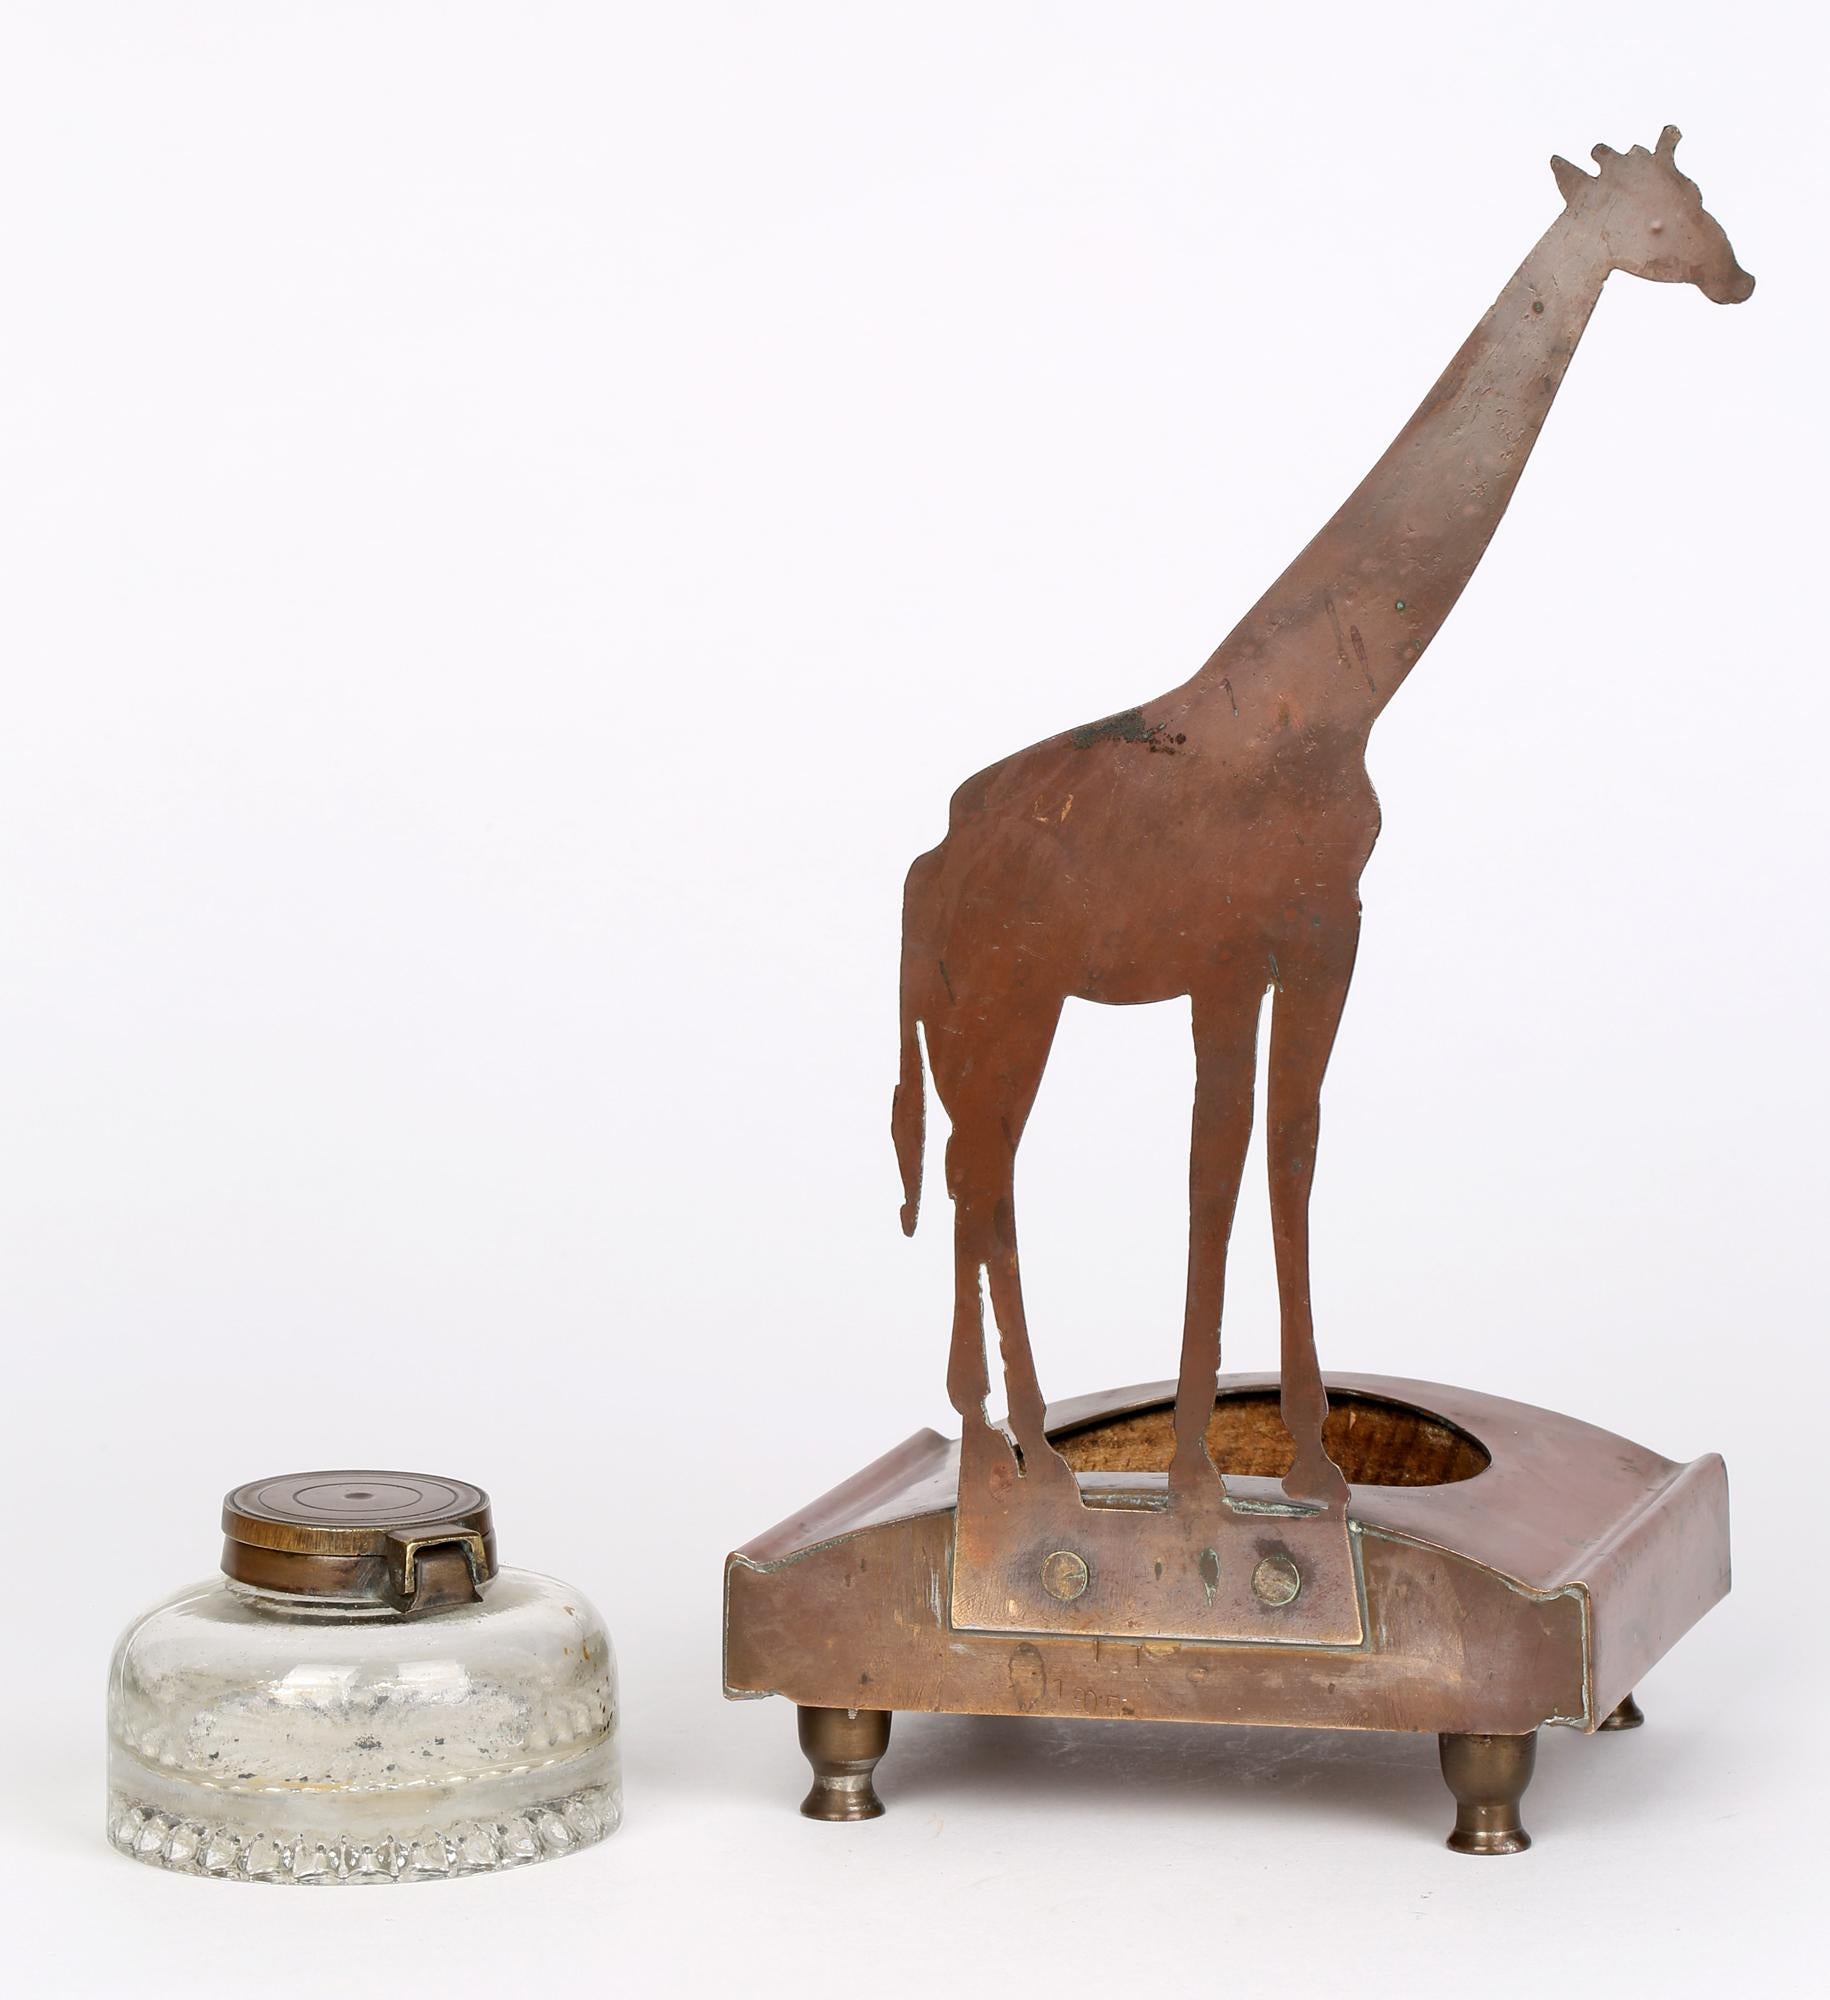 Jugendstil German copper giraffe mounted ink stand by Ignatius Taschner (German, 1871-1913) dated 1905. This rare ink stand comprises of a wooden block set within a copper surround with a central mounted removable lidded glass inkwell. The stand has